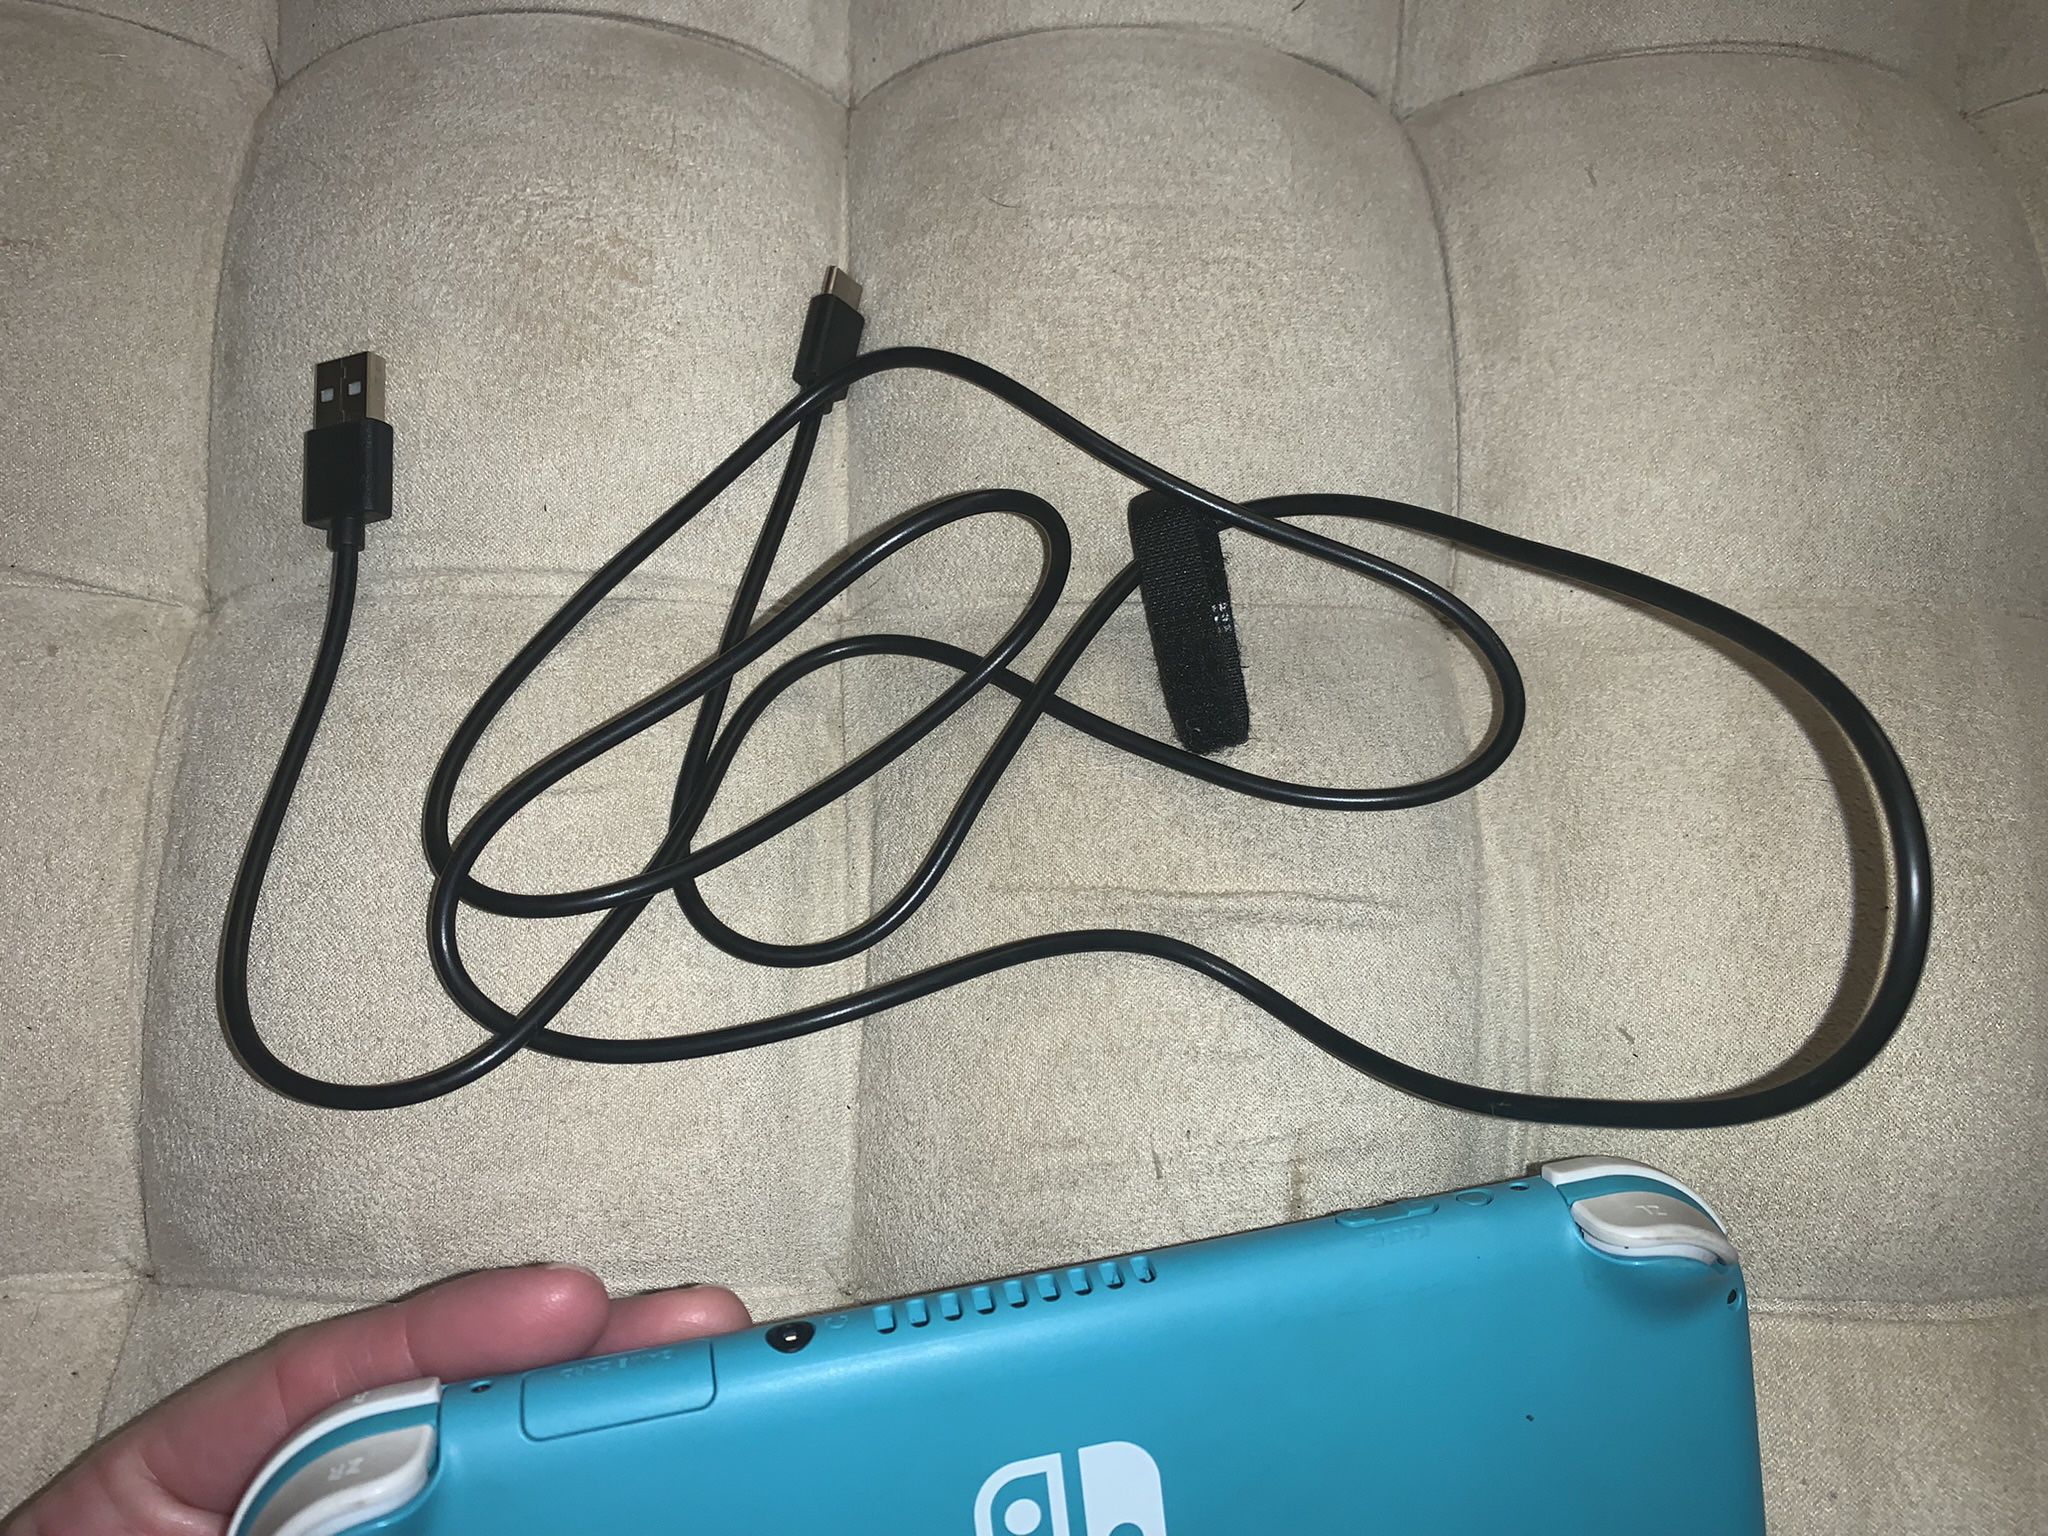 Nintendo Switch Lite Turquoise With Two Games And Charger Cord 